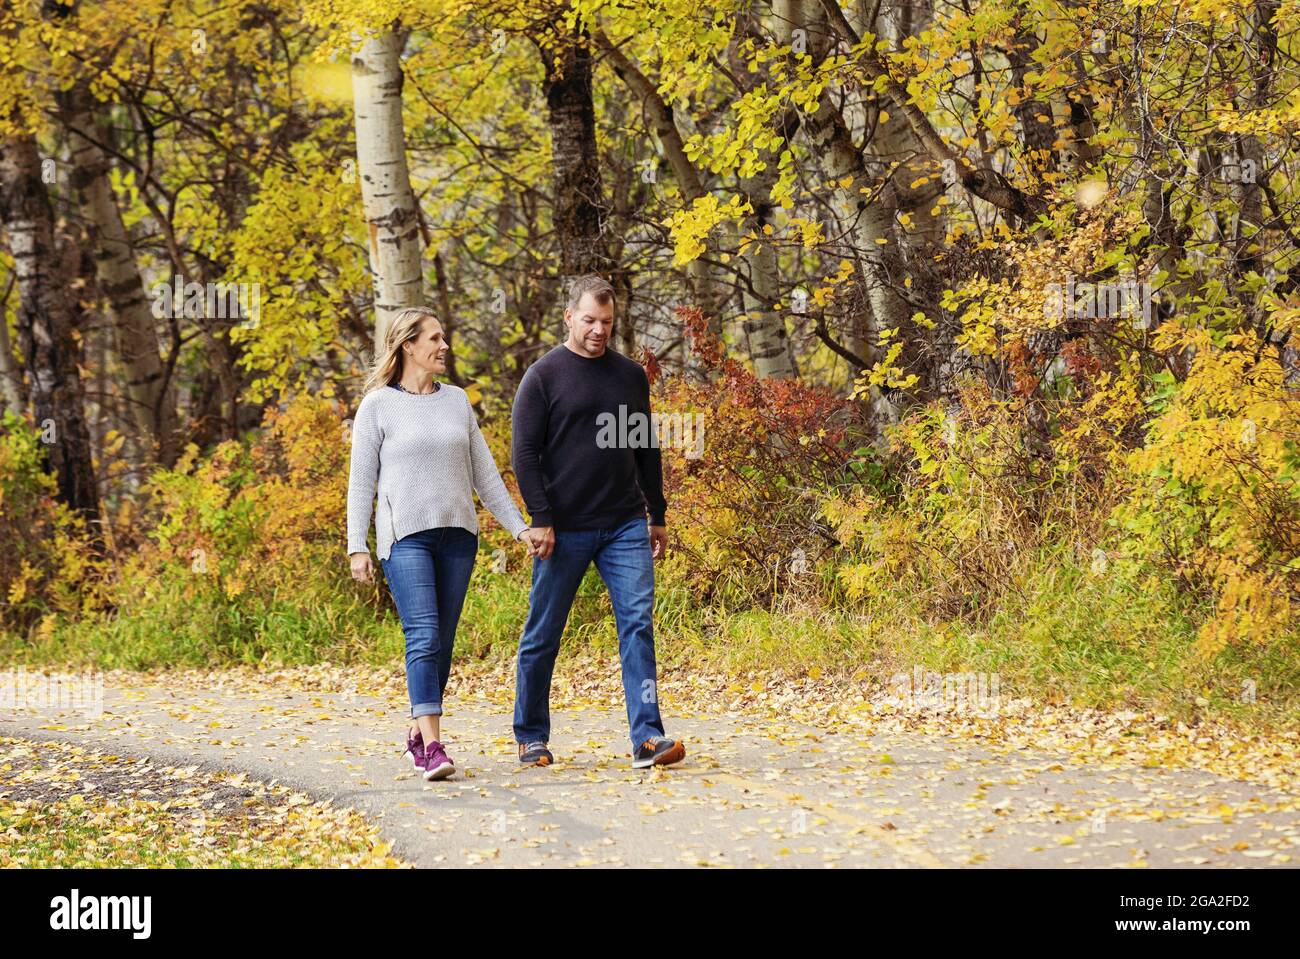 A mature married couple spending quality time together in a city park during the fall season, taking a walk down a trail and holding hands Stock Photo